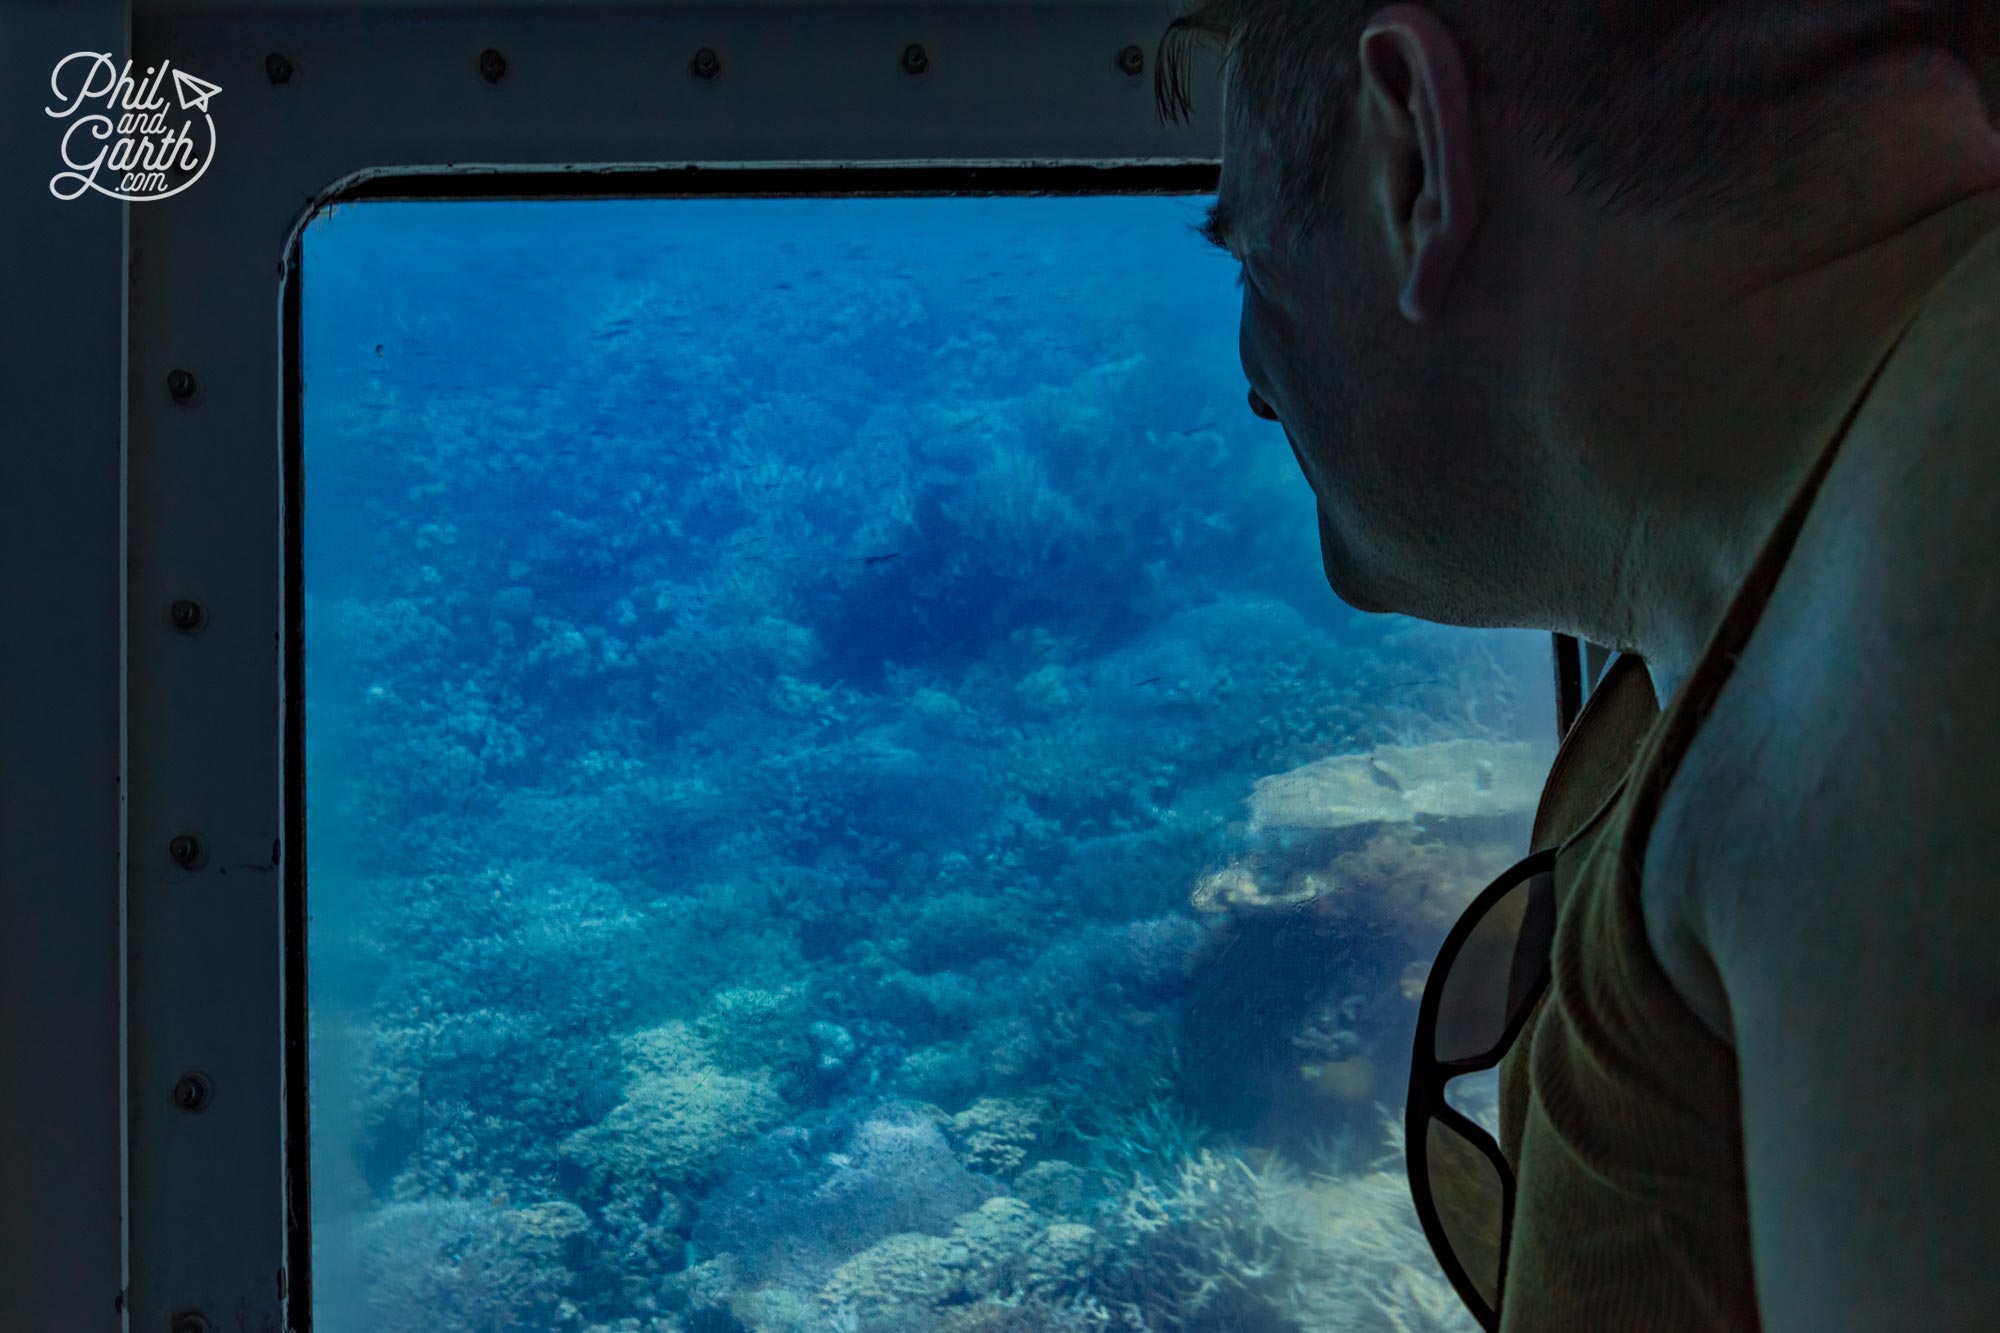 Phil checking out the view from the semi submersible